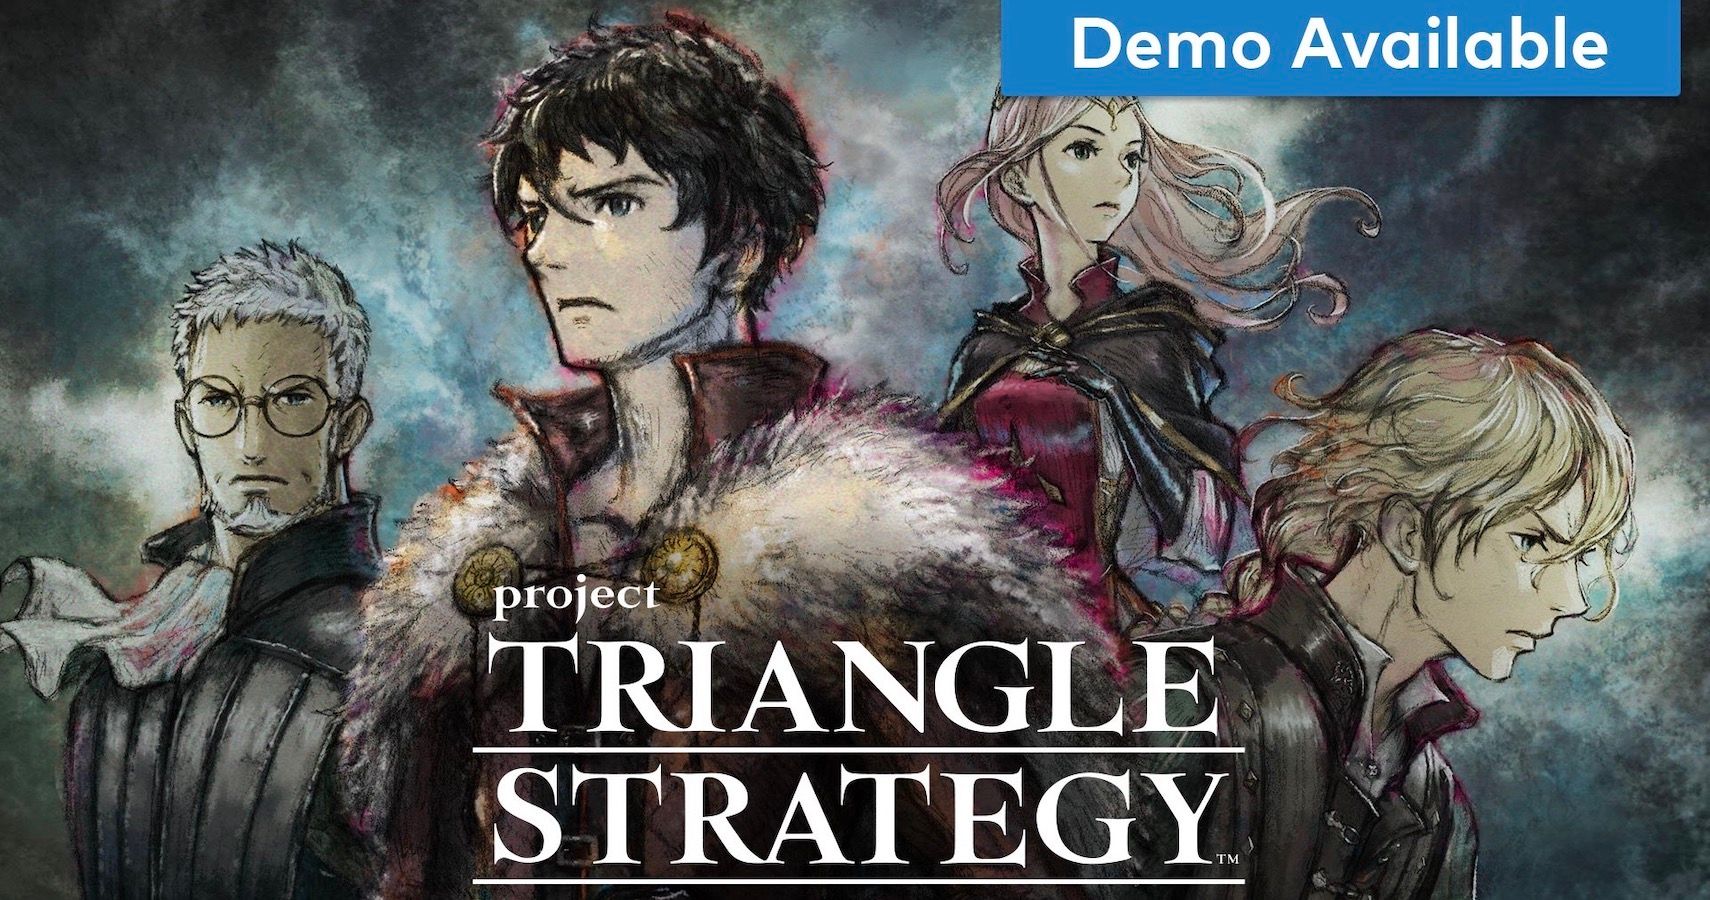 Project Triangle Strategy Demo Available Now On Nintendo Switch